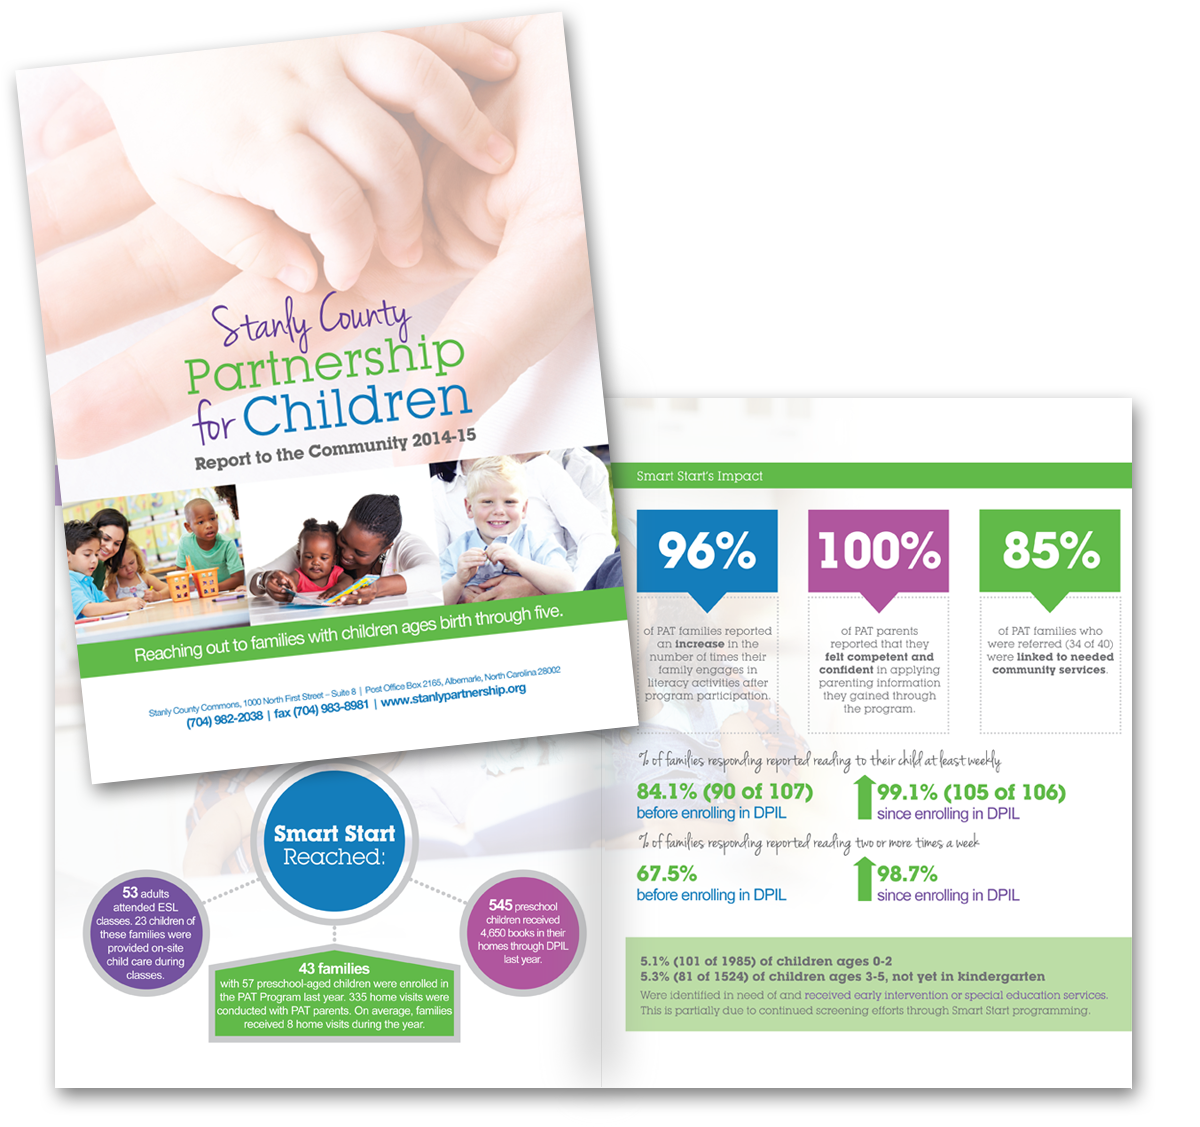 Stanly County Partnership for Children - Annual Report Design